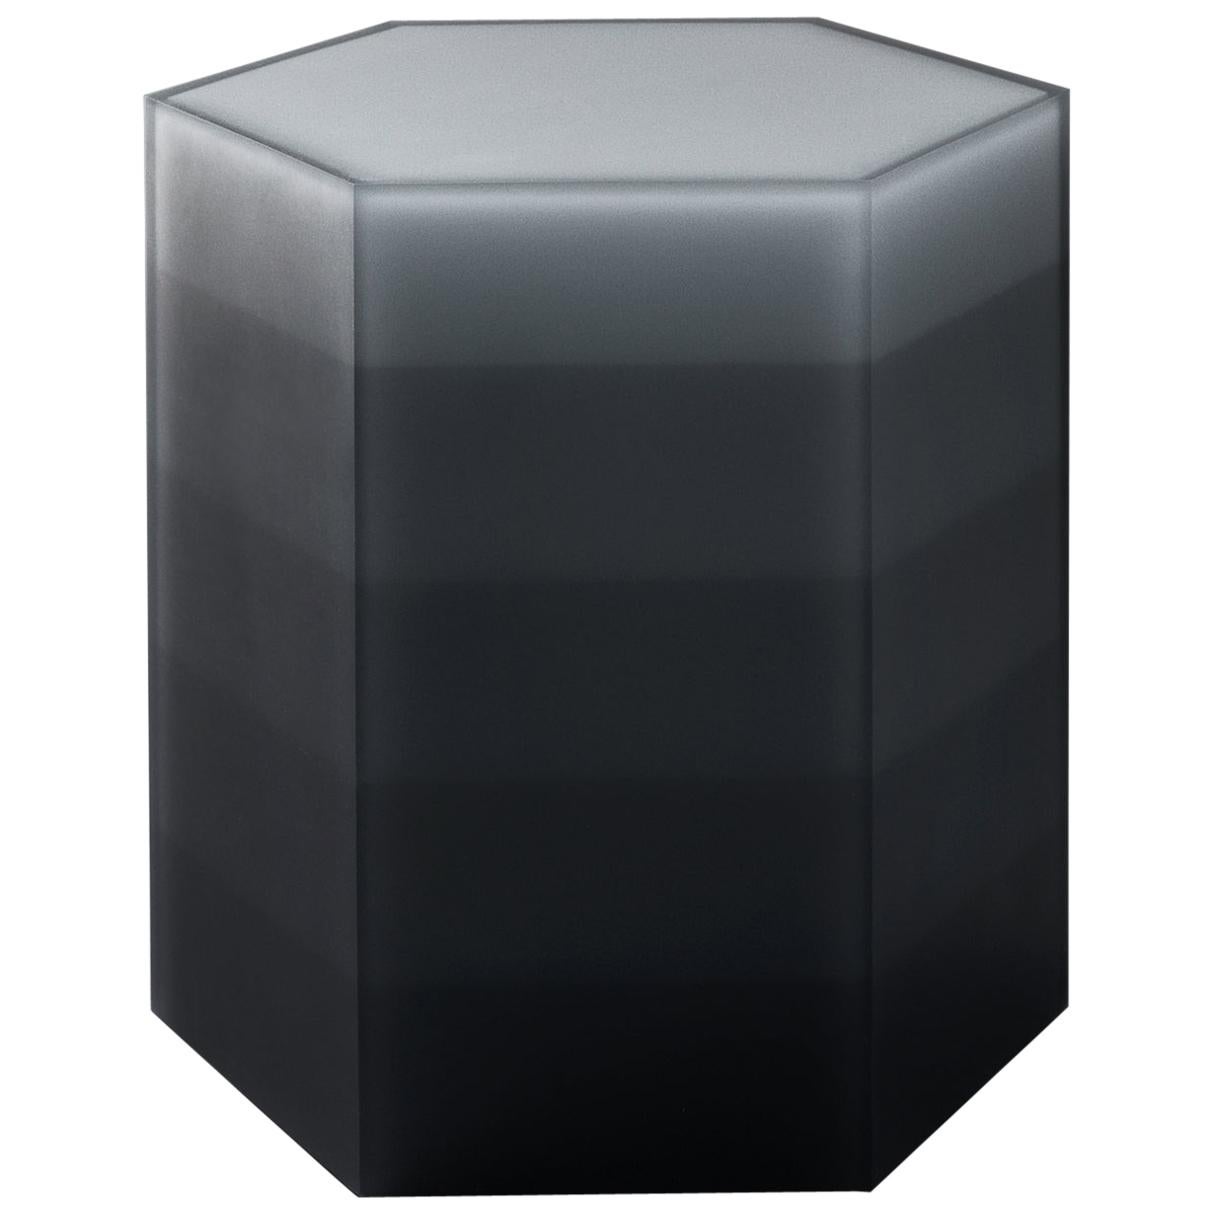 Gradient Hex Box Resin Side Table/Stool Gray by Facture, REP by Tuleste Factory For Sale